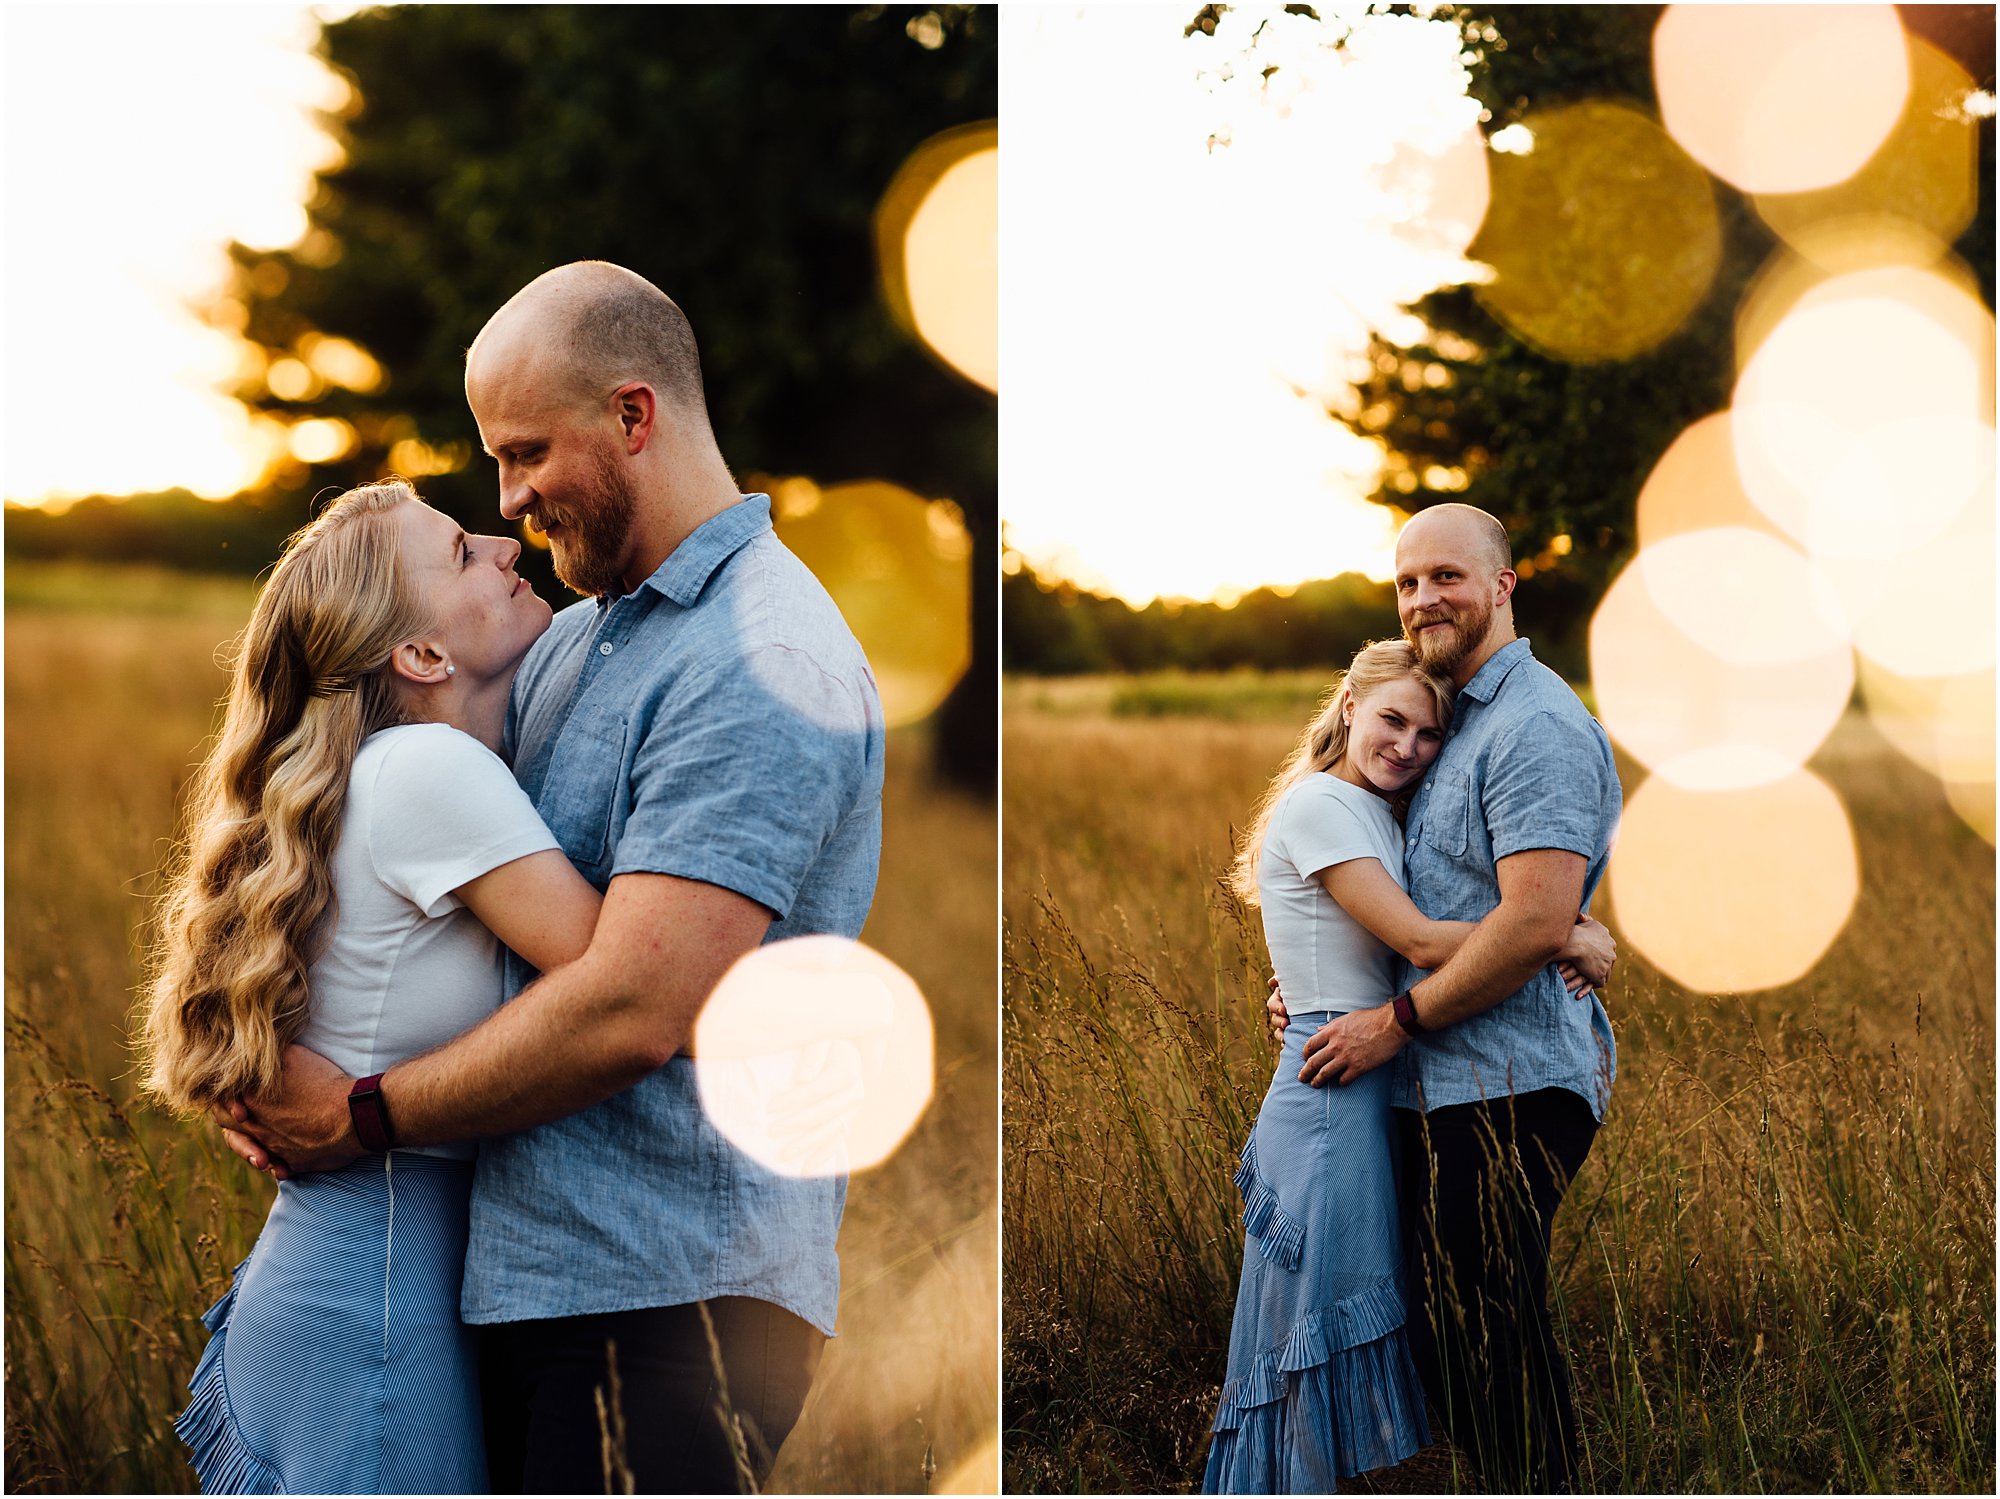 Couple embracing in the middle of a wheat field with bokeh lights